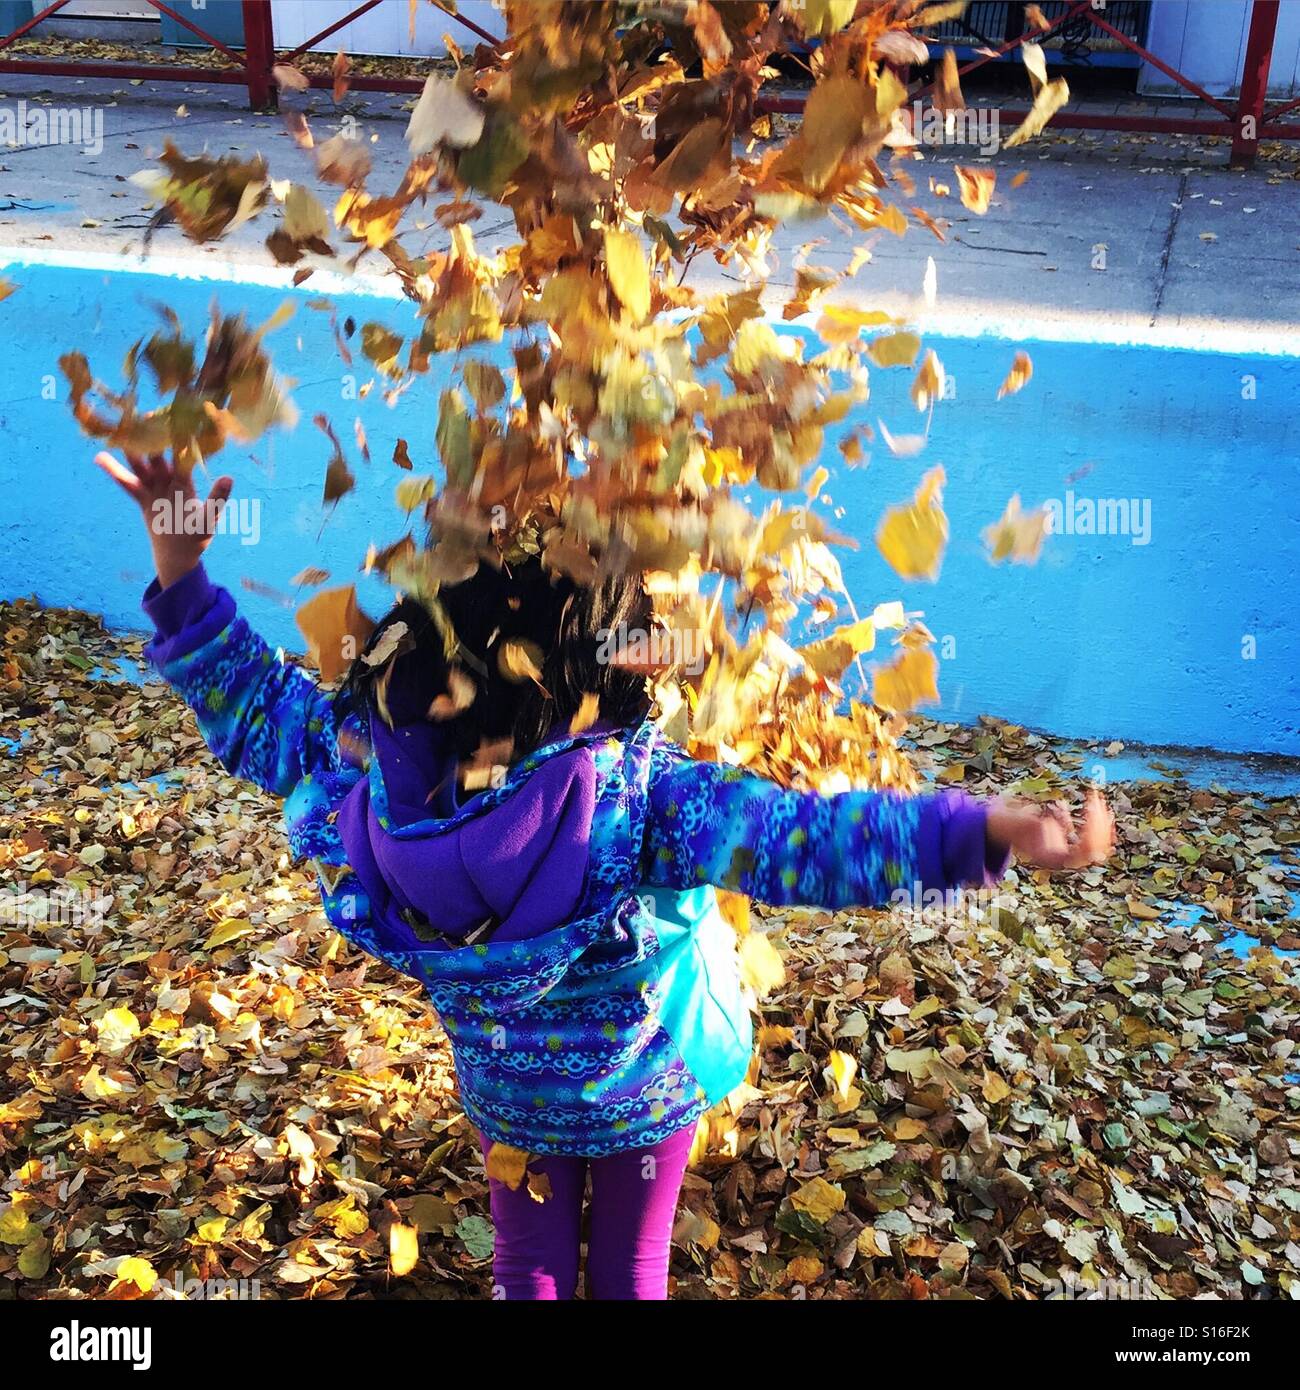 Falling leaves by K.R. Stock Photo